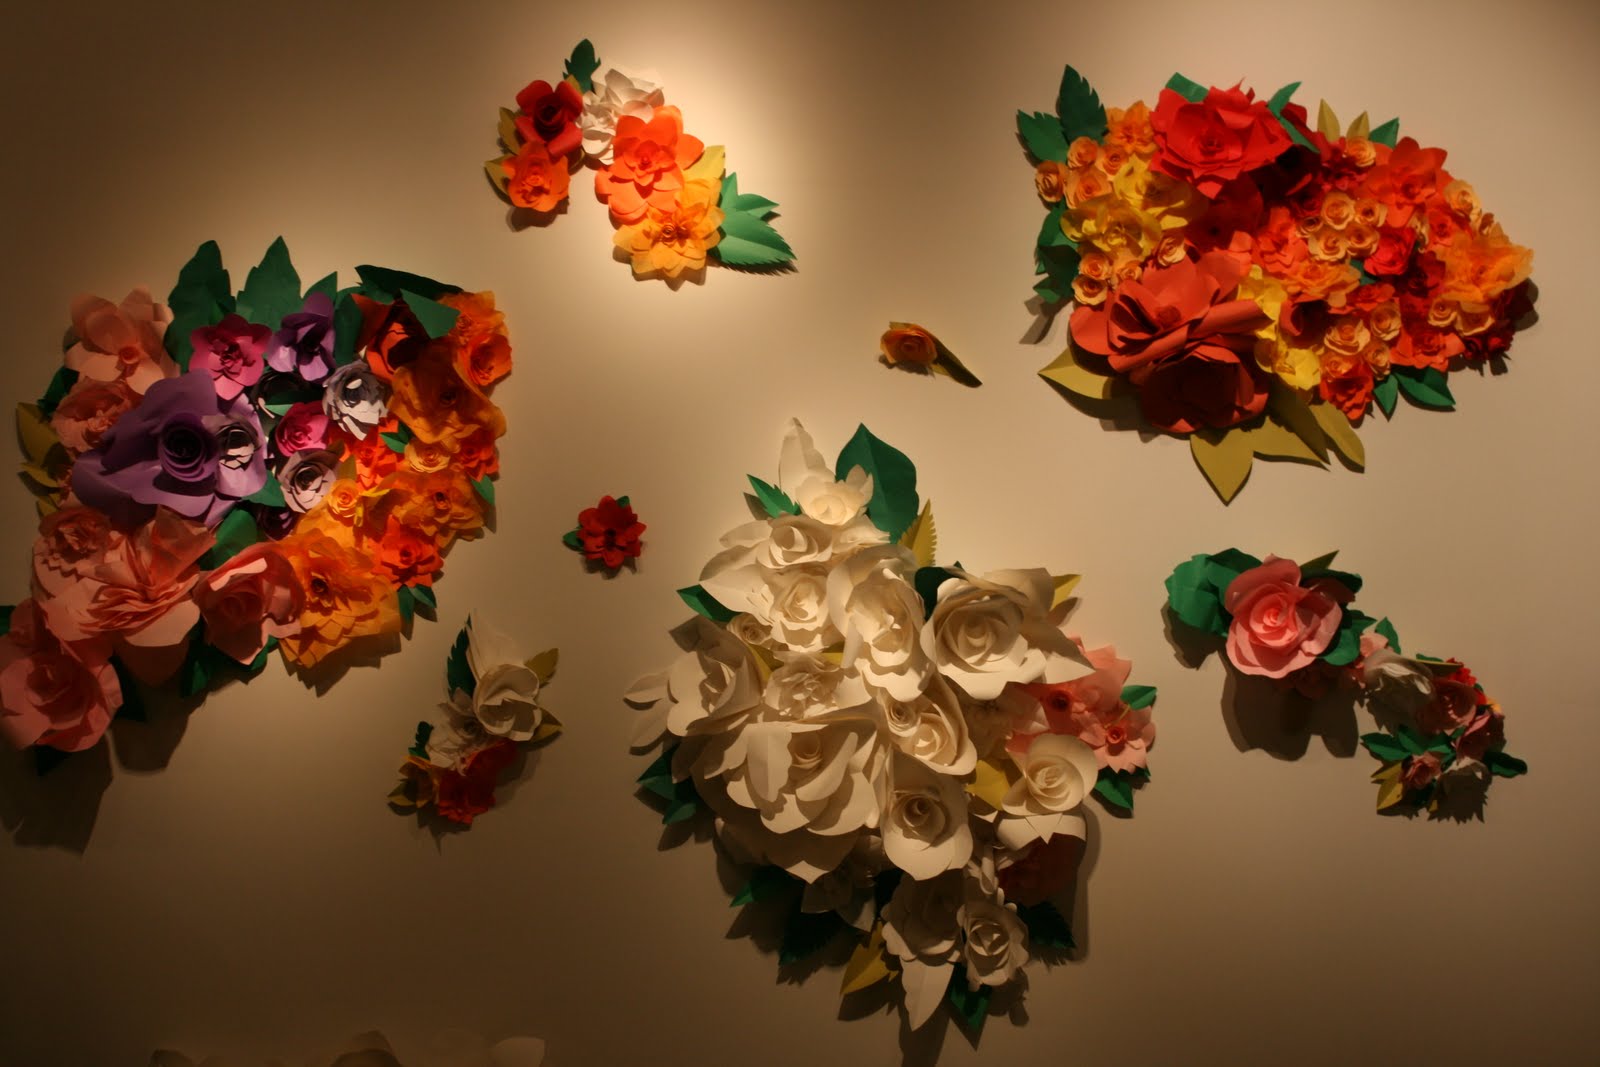 part of her paper rose installation at a gallery in North Portland